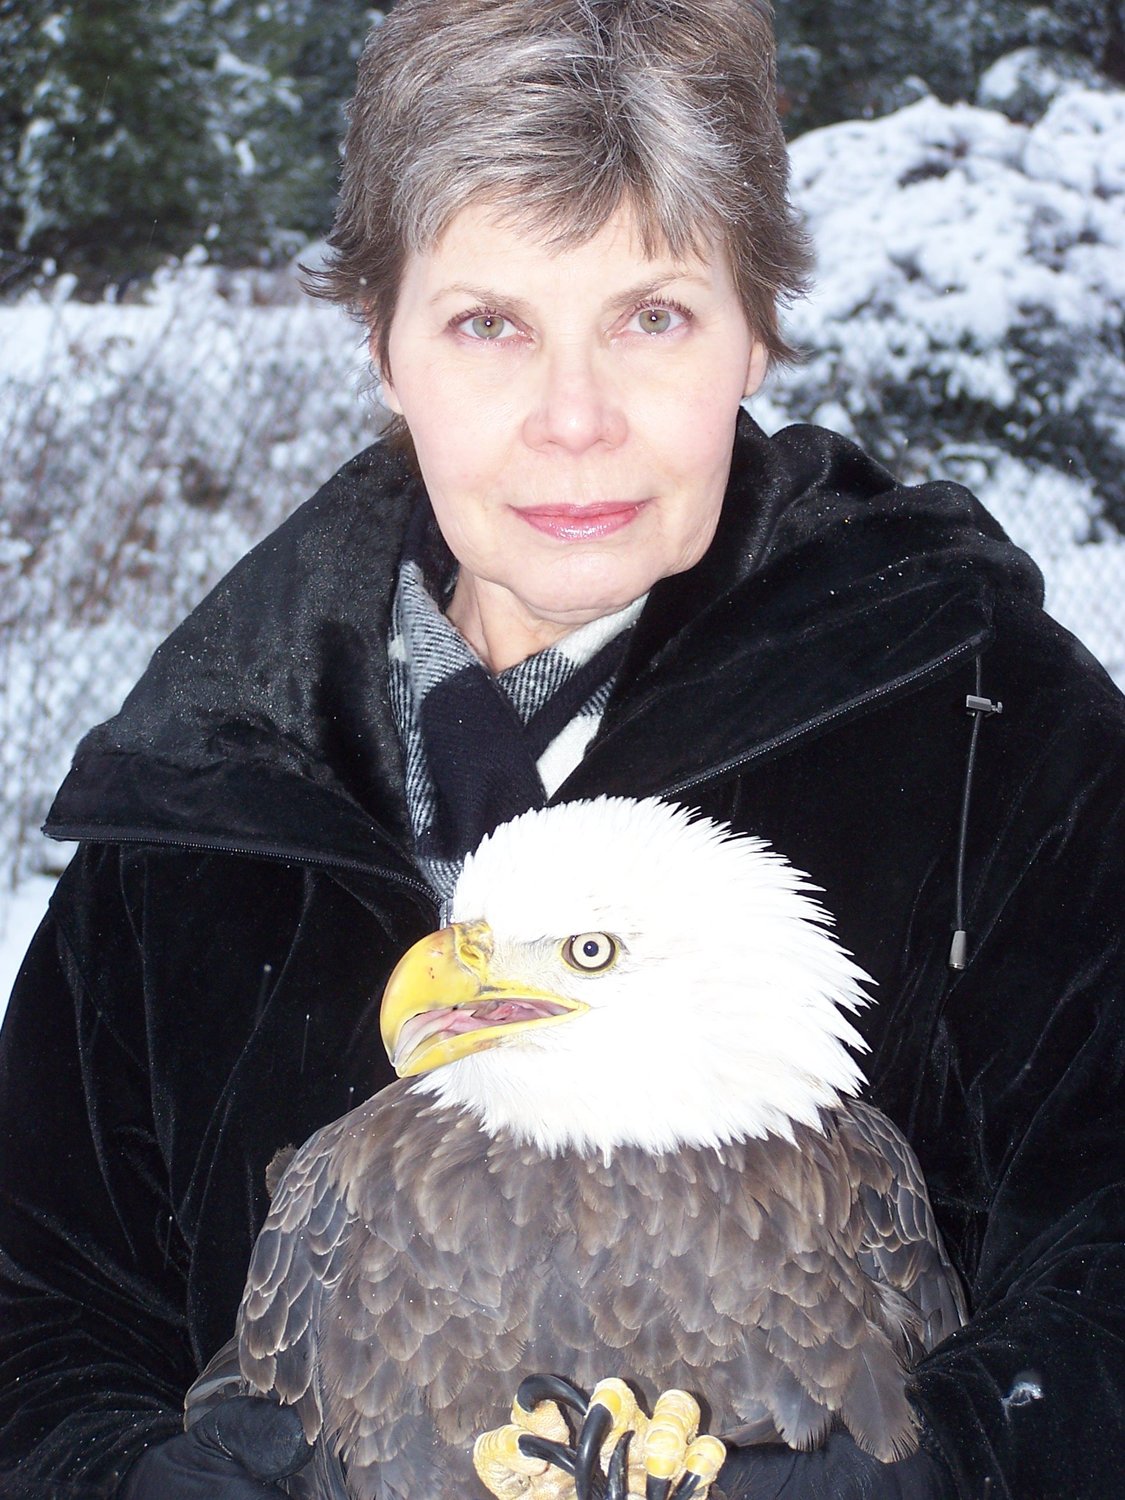 Stephanie Streeter co-founded the Delaware Valley Raptor Center in Milford, PA with her husband, Bill, where she ran day-to-day operations related to raptor rehabilitation and conservation, chaired the board of directors and wrote for and edited the center’s informative publication, the DVRC Journal. ..